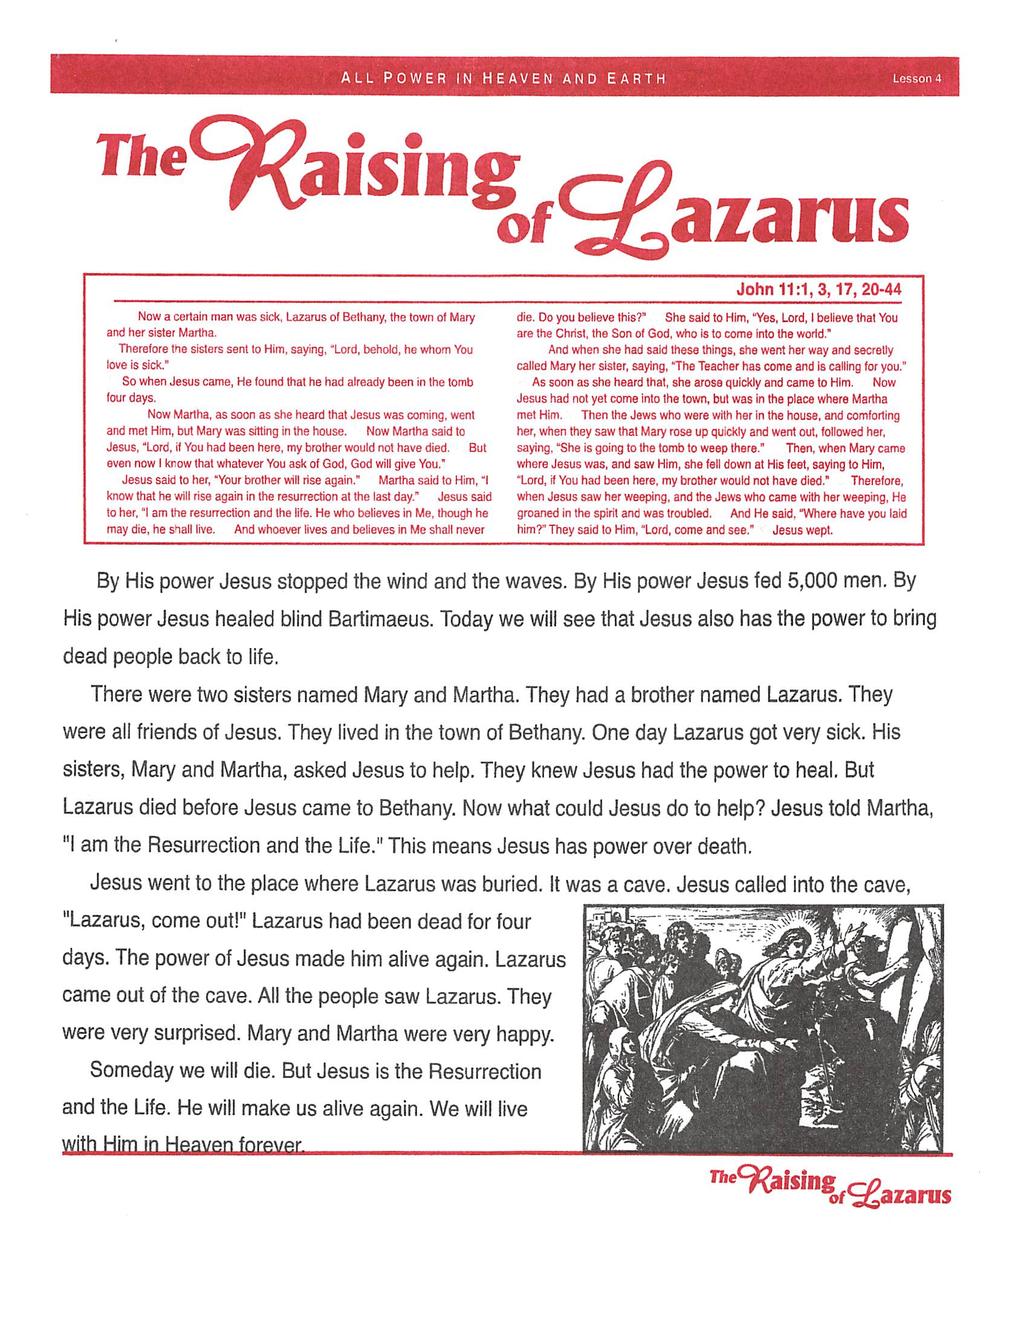 ALL POWER IN HEAVEN AND EARTH *^aising azarus Now a certain man was sick, Lazarus of Bethany, the town of Mary and her sister Martha.